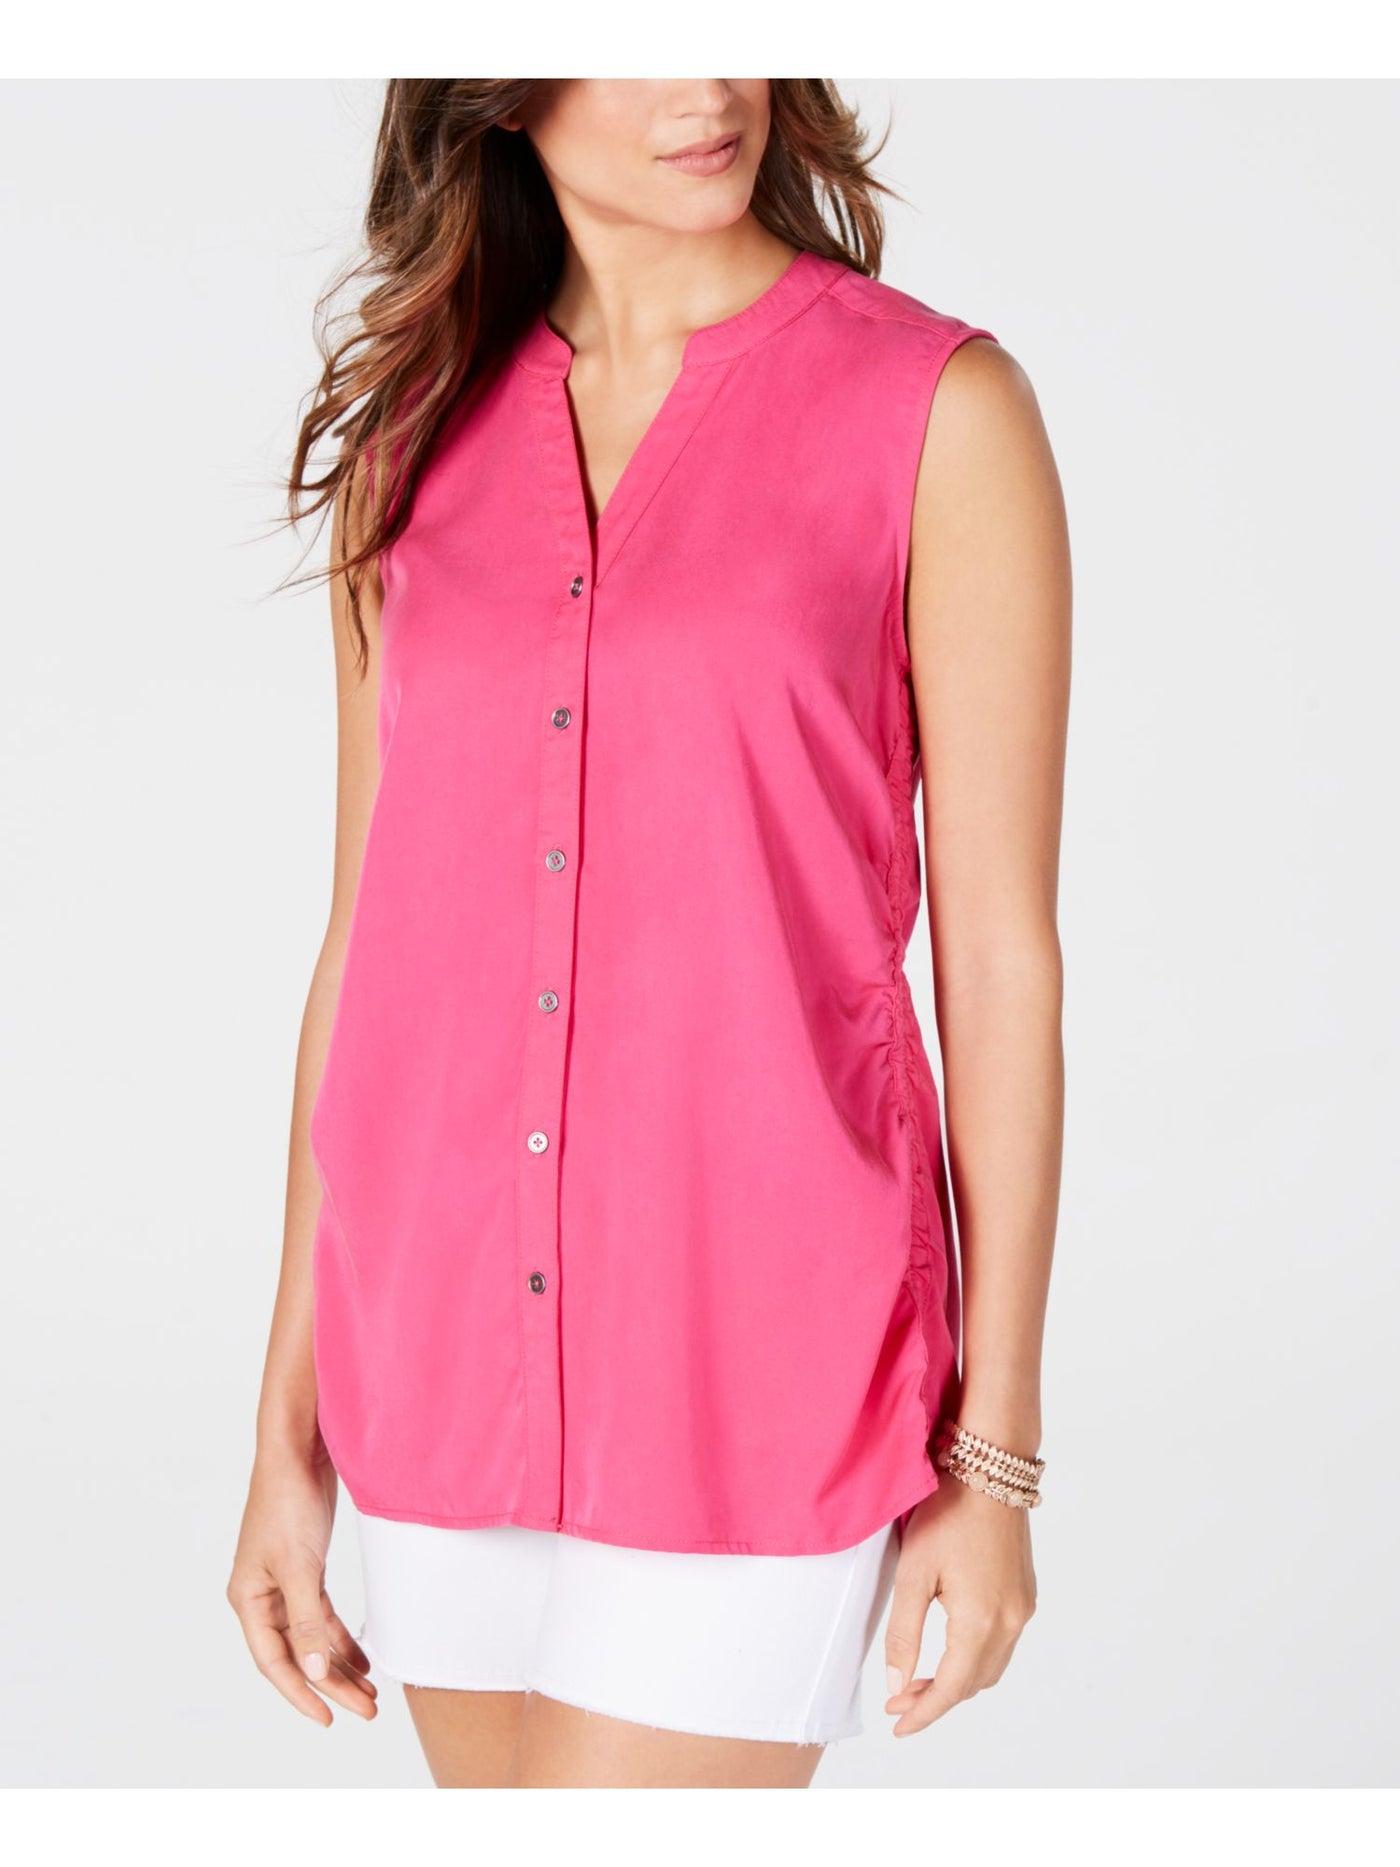 STYLE & COMPANY Womens Tie Front Sleeveless Collared Blouse